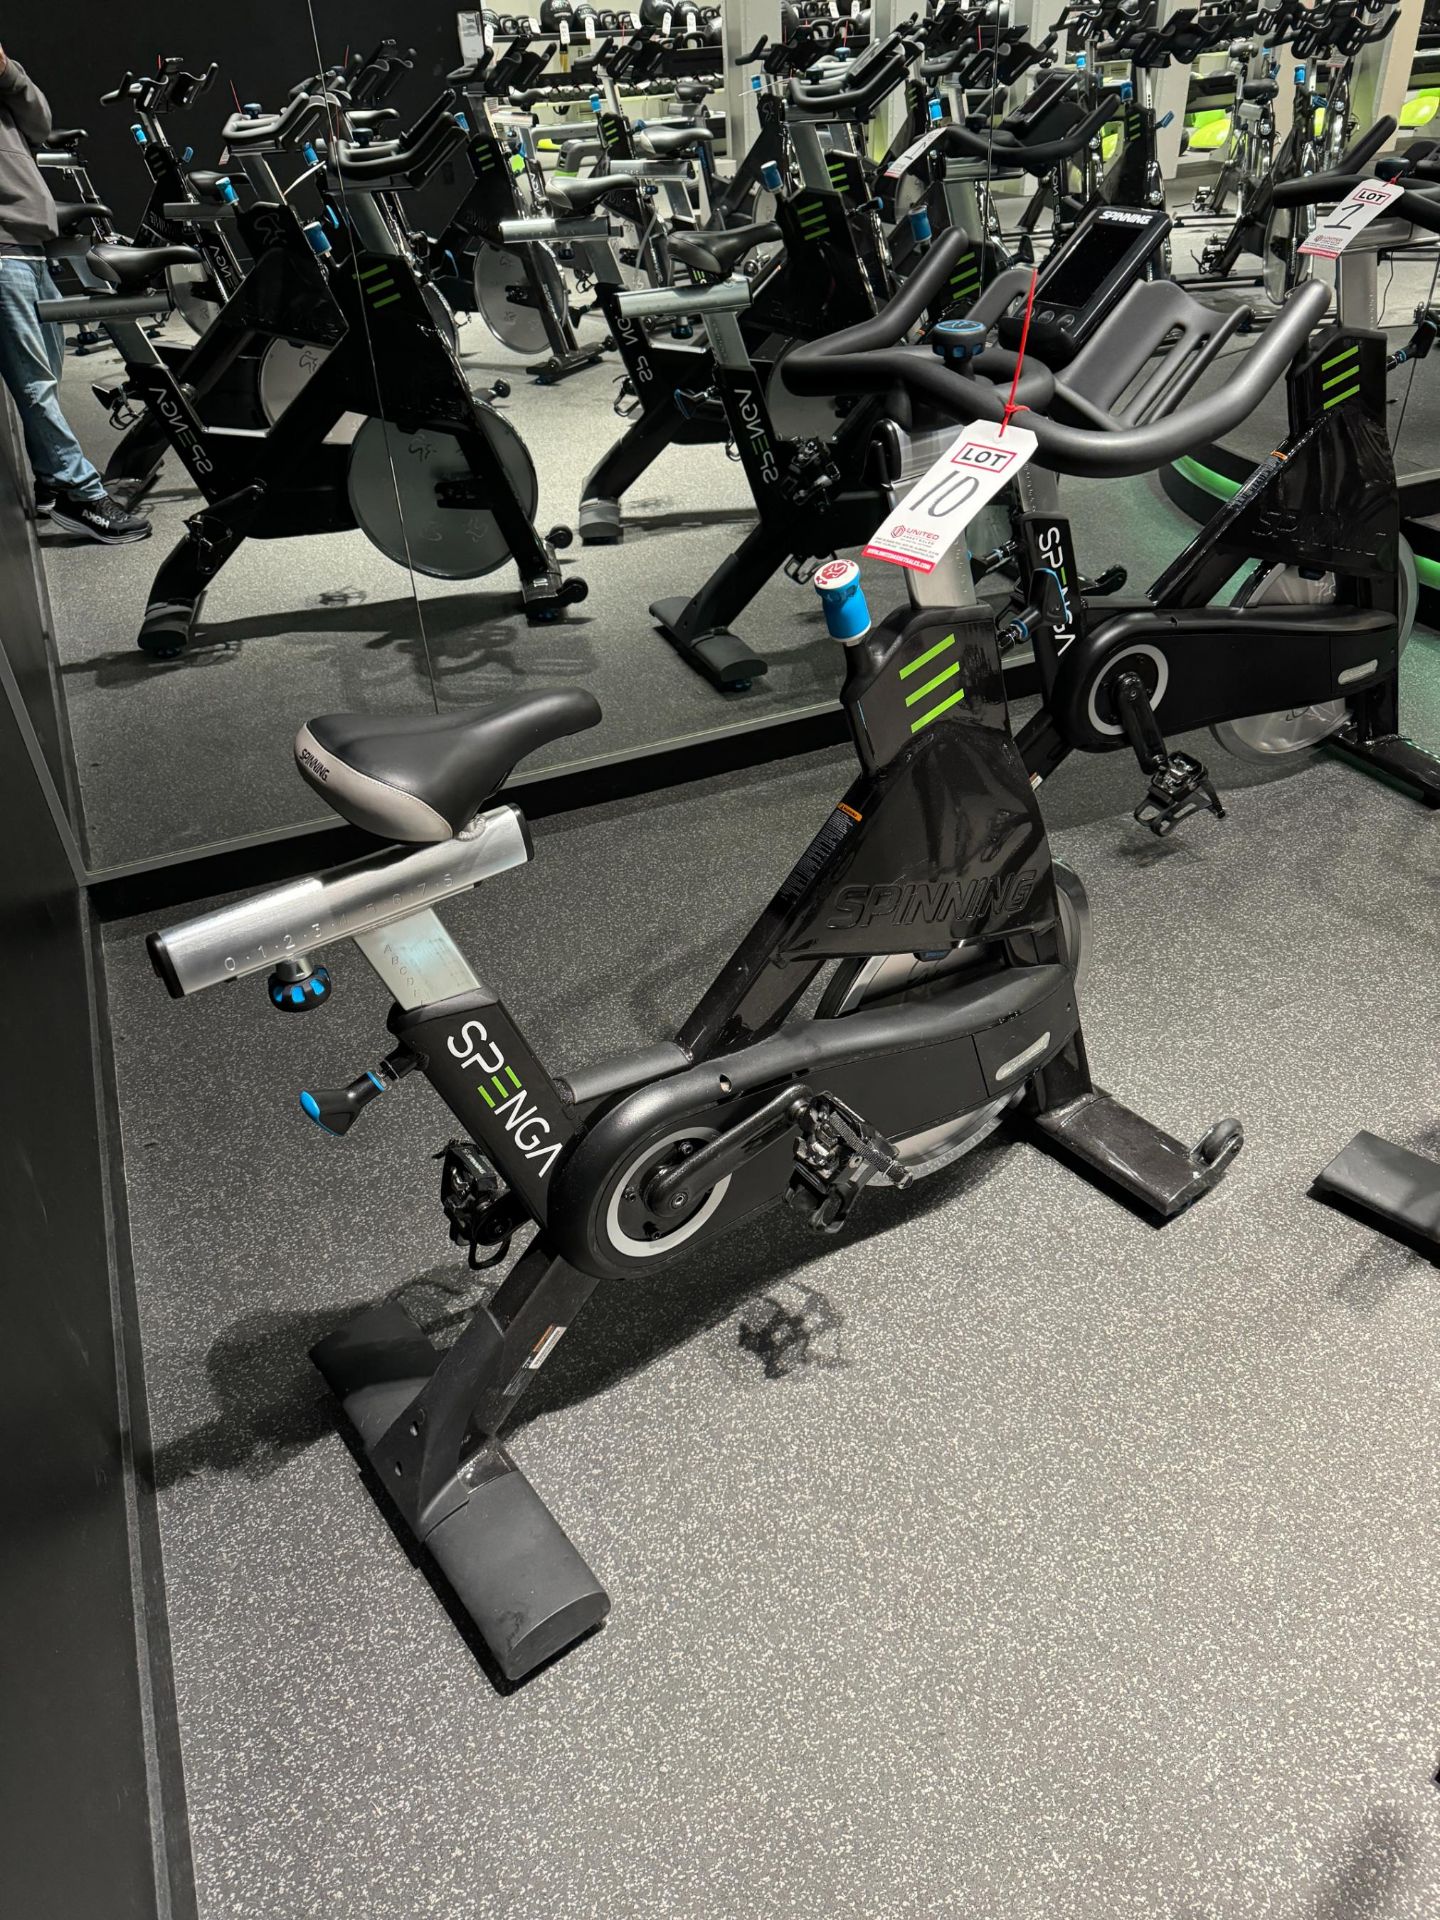 PRECOR SBK 869 SPINNER CHRONO POWER BIKE, W/ CONSOLE, S/N AC97I20190211, (NOTE: SOLD SUBJECT TO BULK